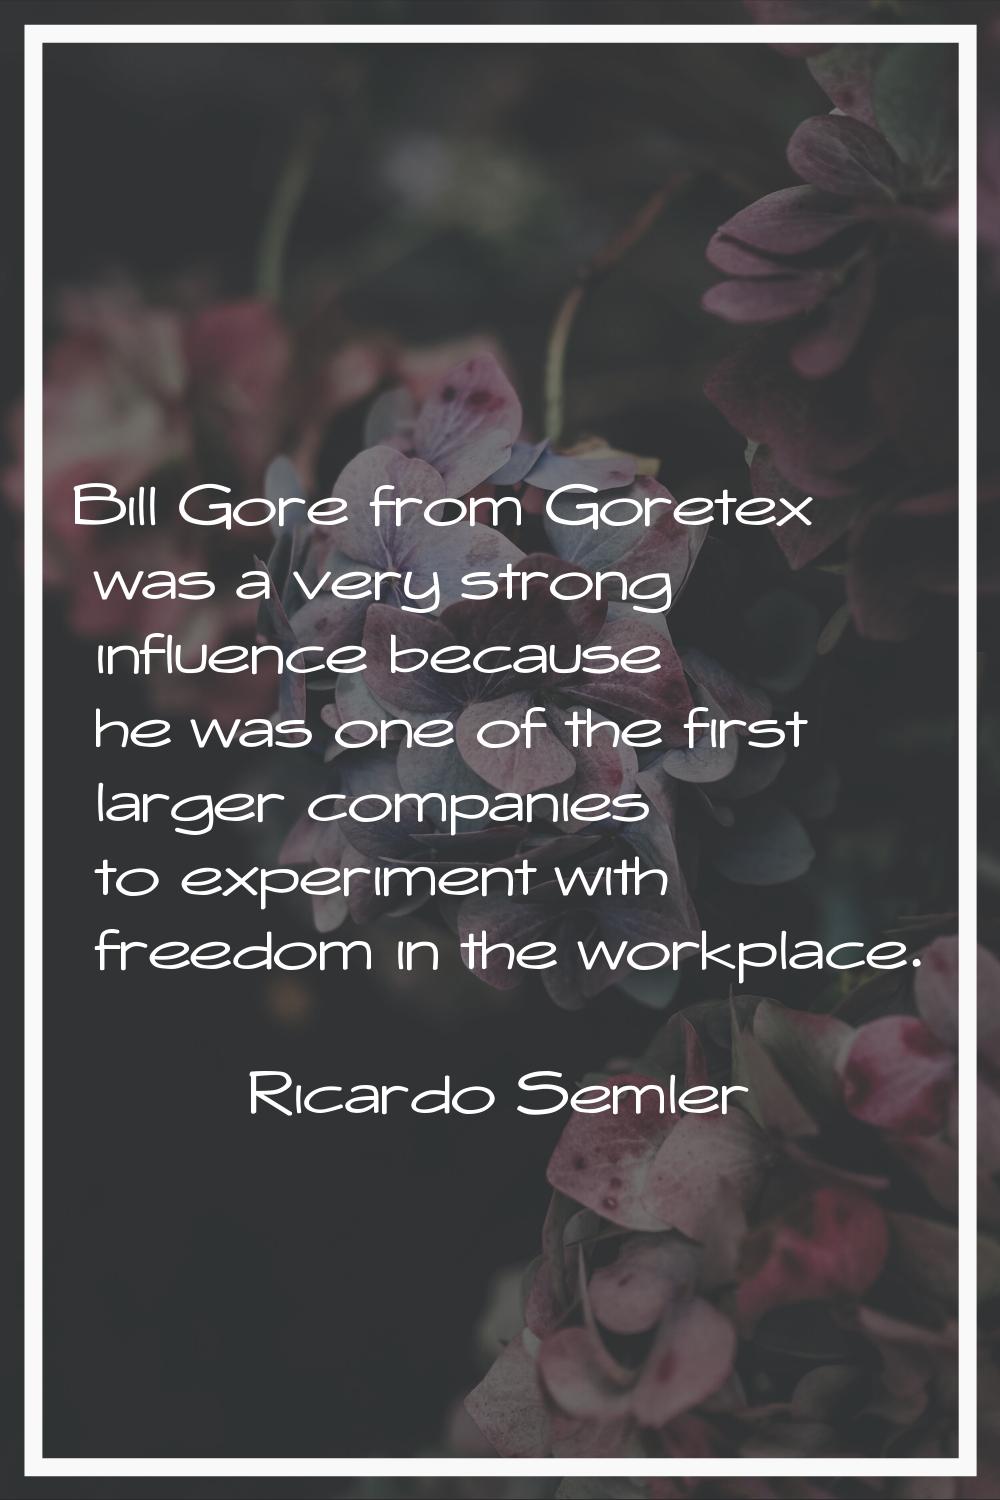 Bill Gore from Goretex was a very strong influence because he was one of the first larger companies